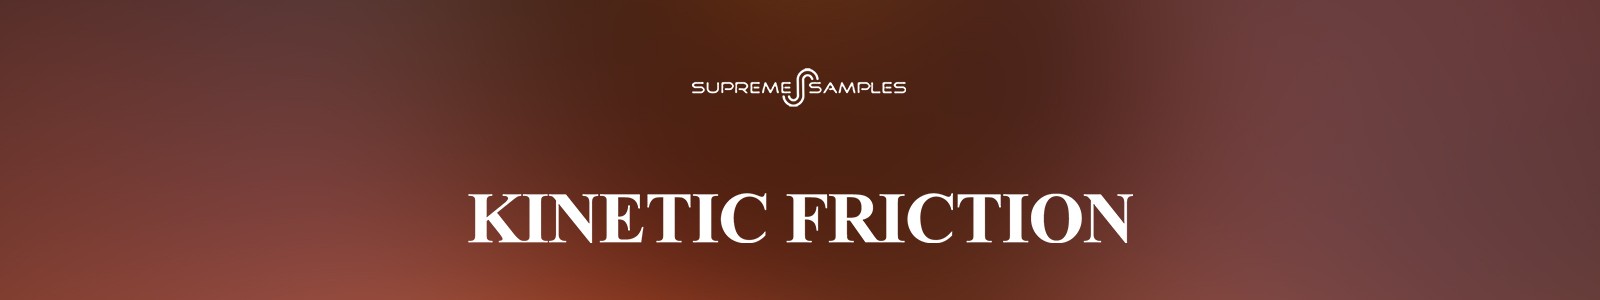 Kinetic Friction by Supreme Samples